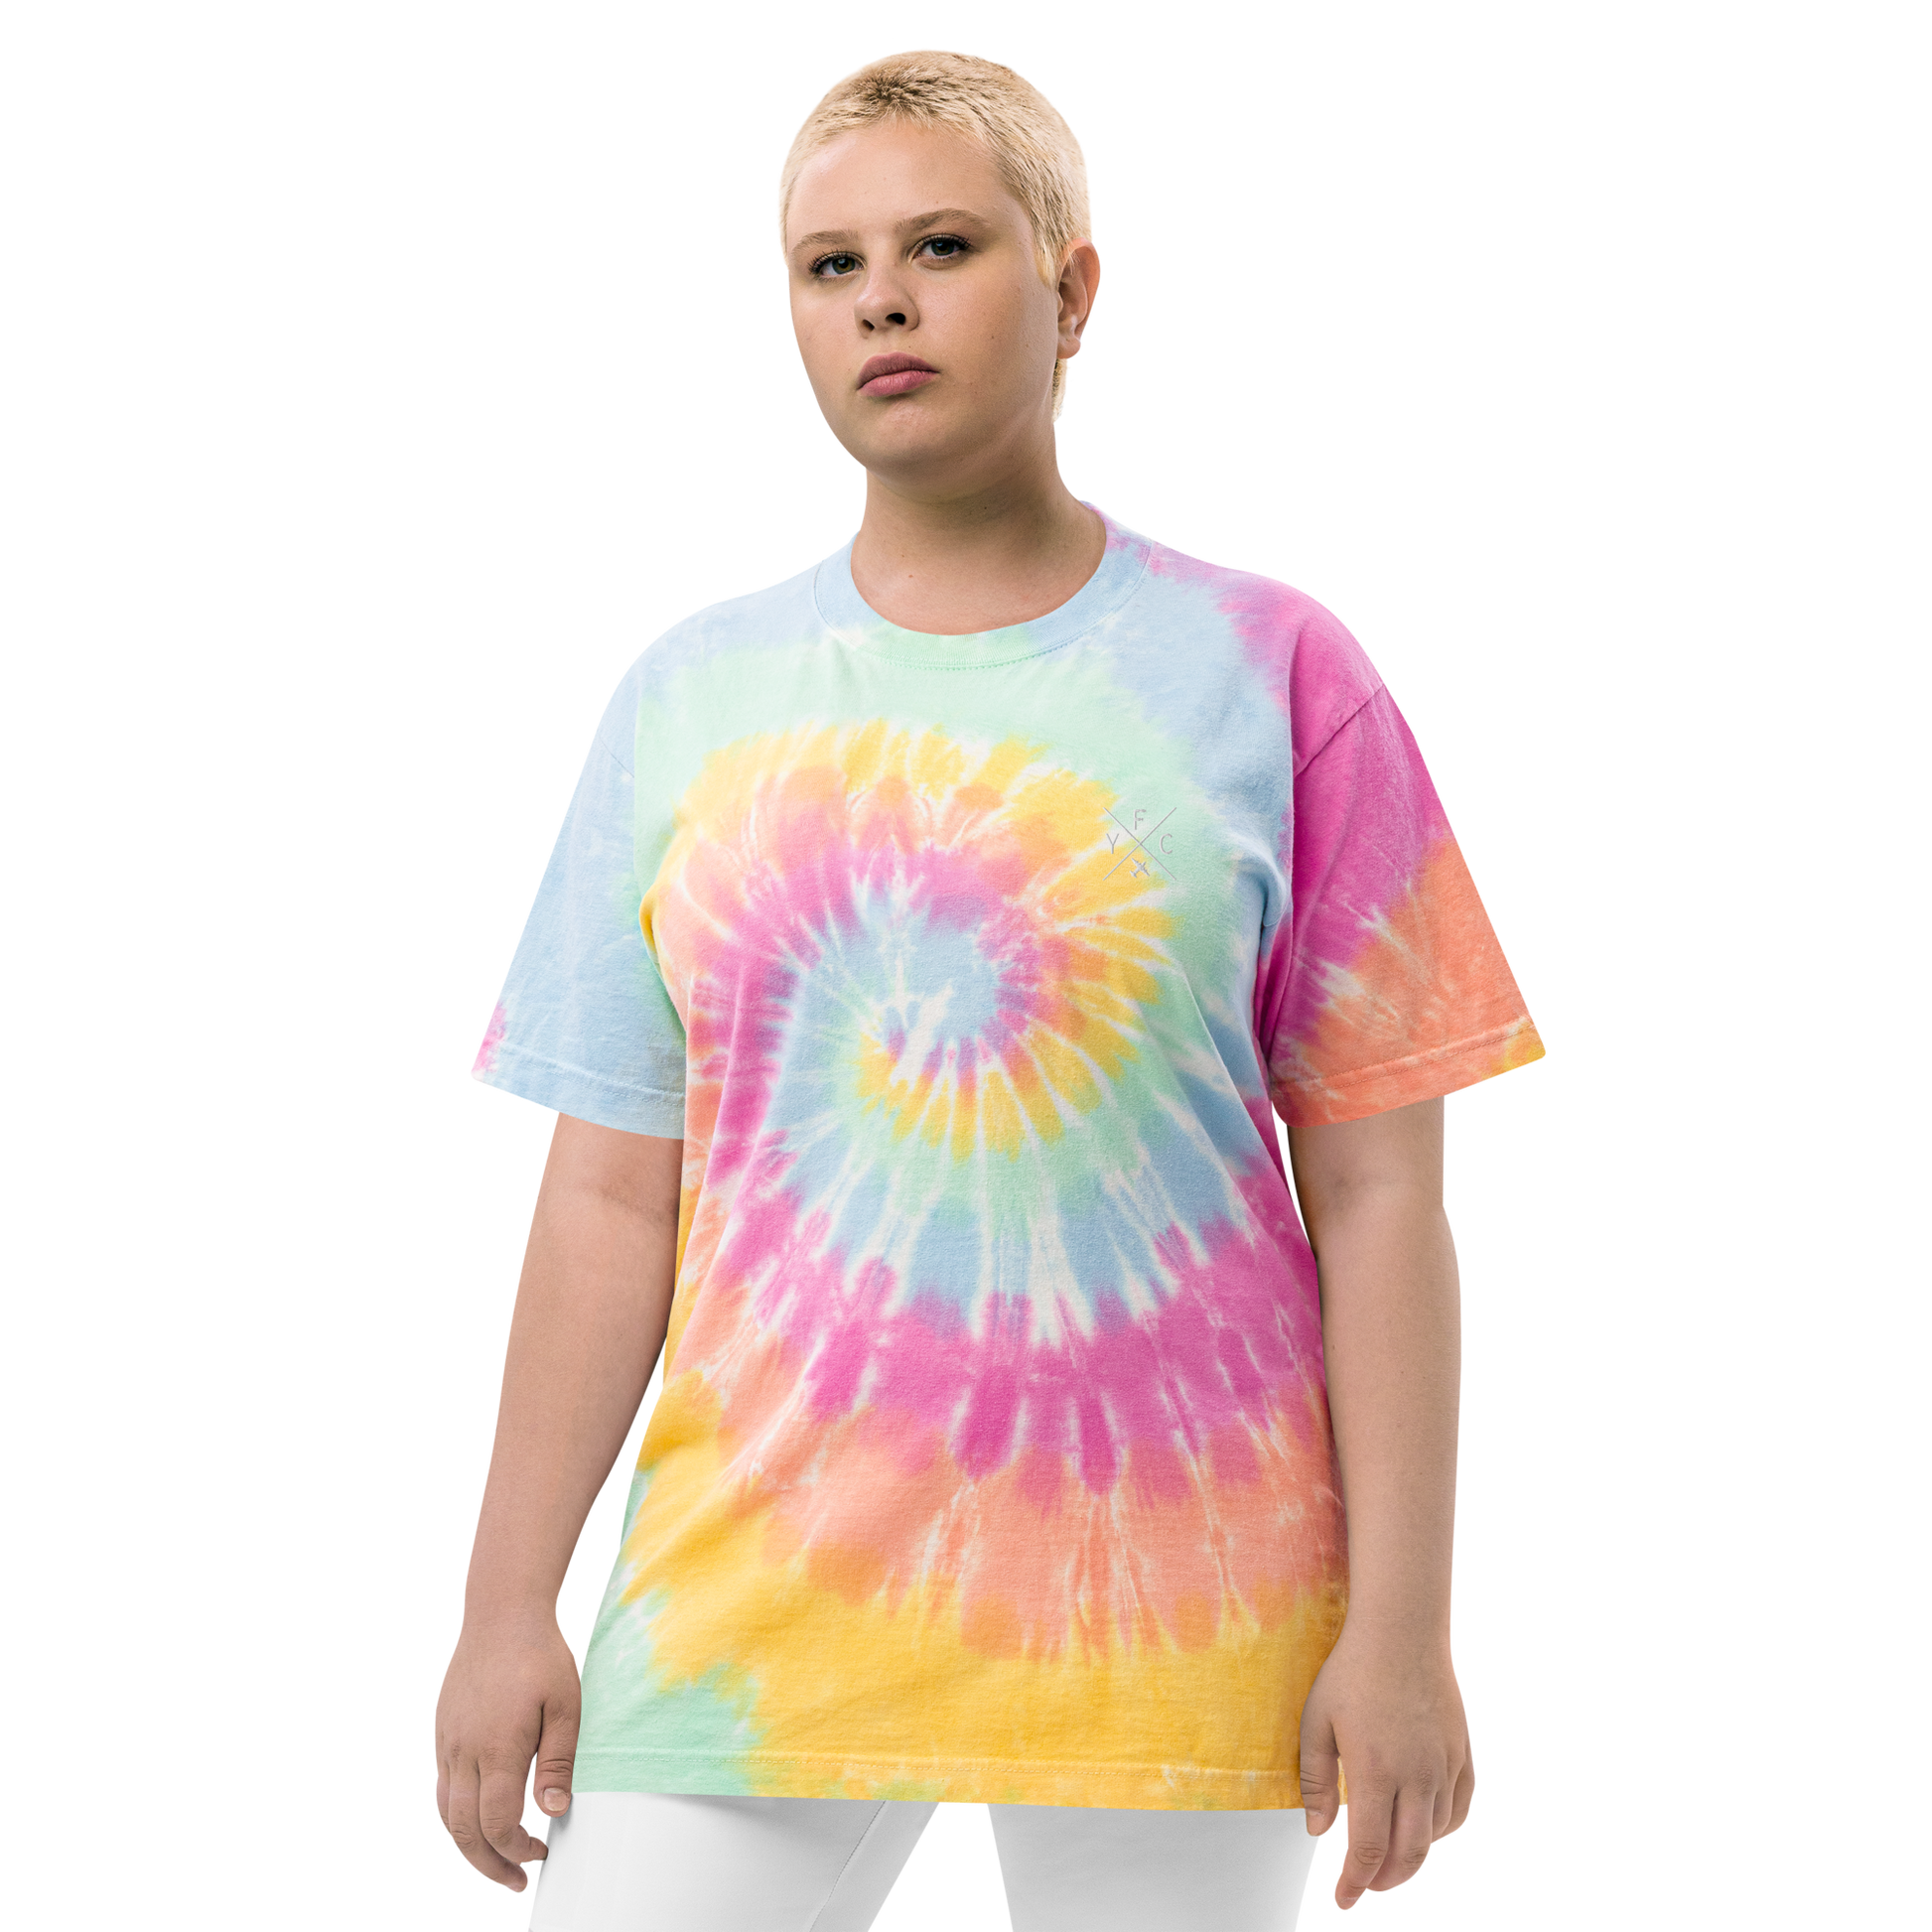 YHM Designs - YFC Fredericton Oversized Tie-Dye T-Shirt - Crossed-X Design with Airport Code and Vintage Propliner - White Embroidery - Image 11